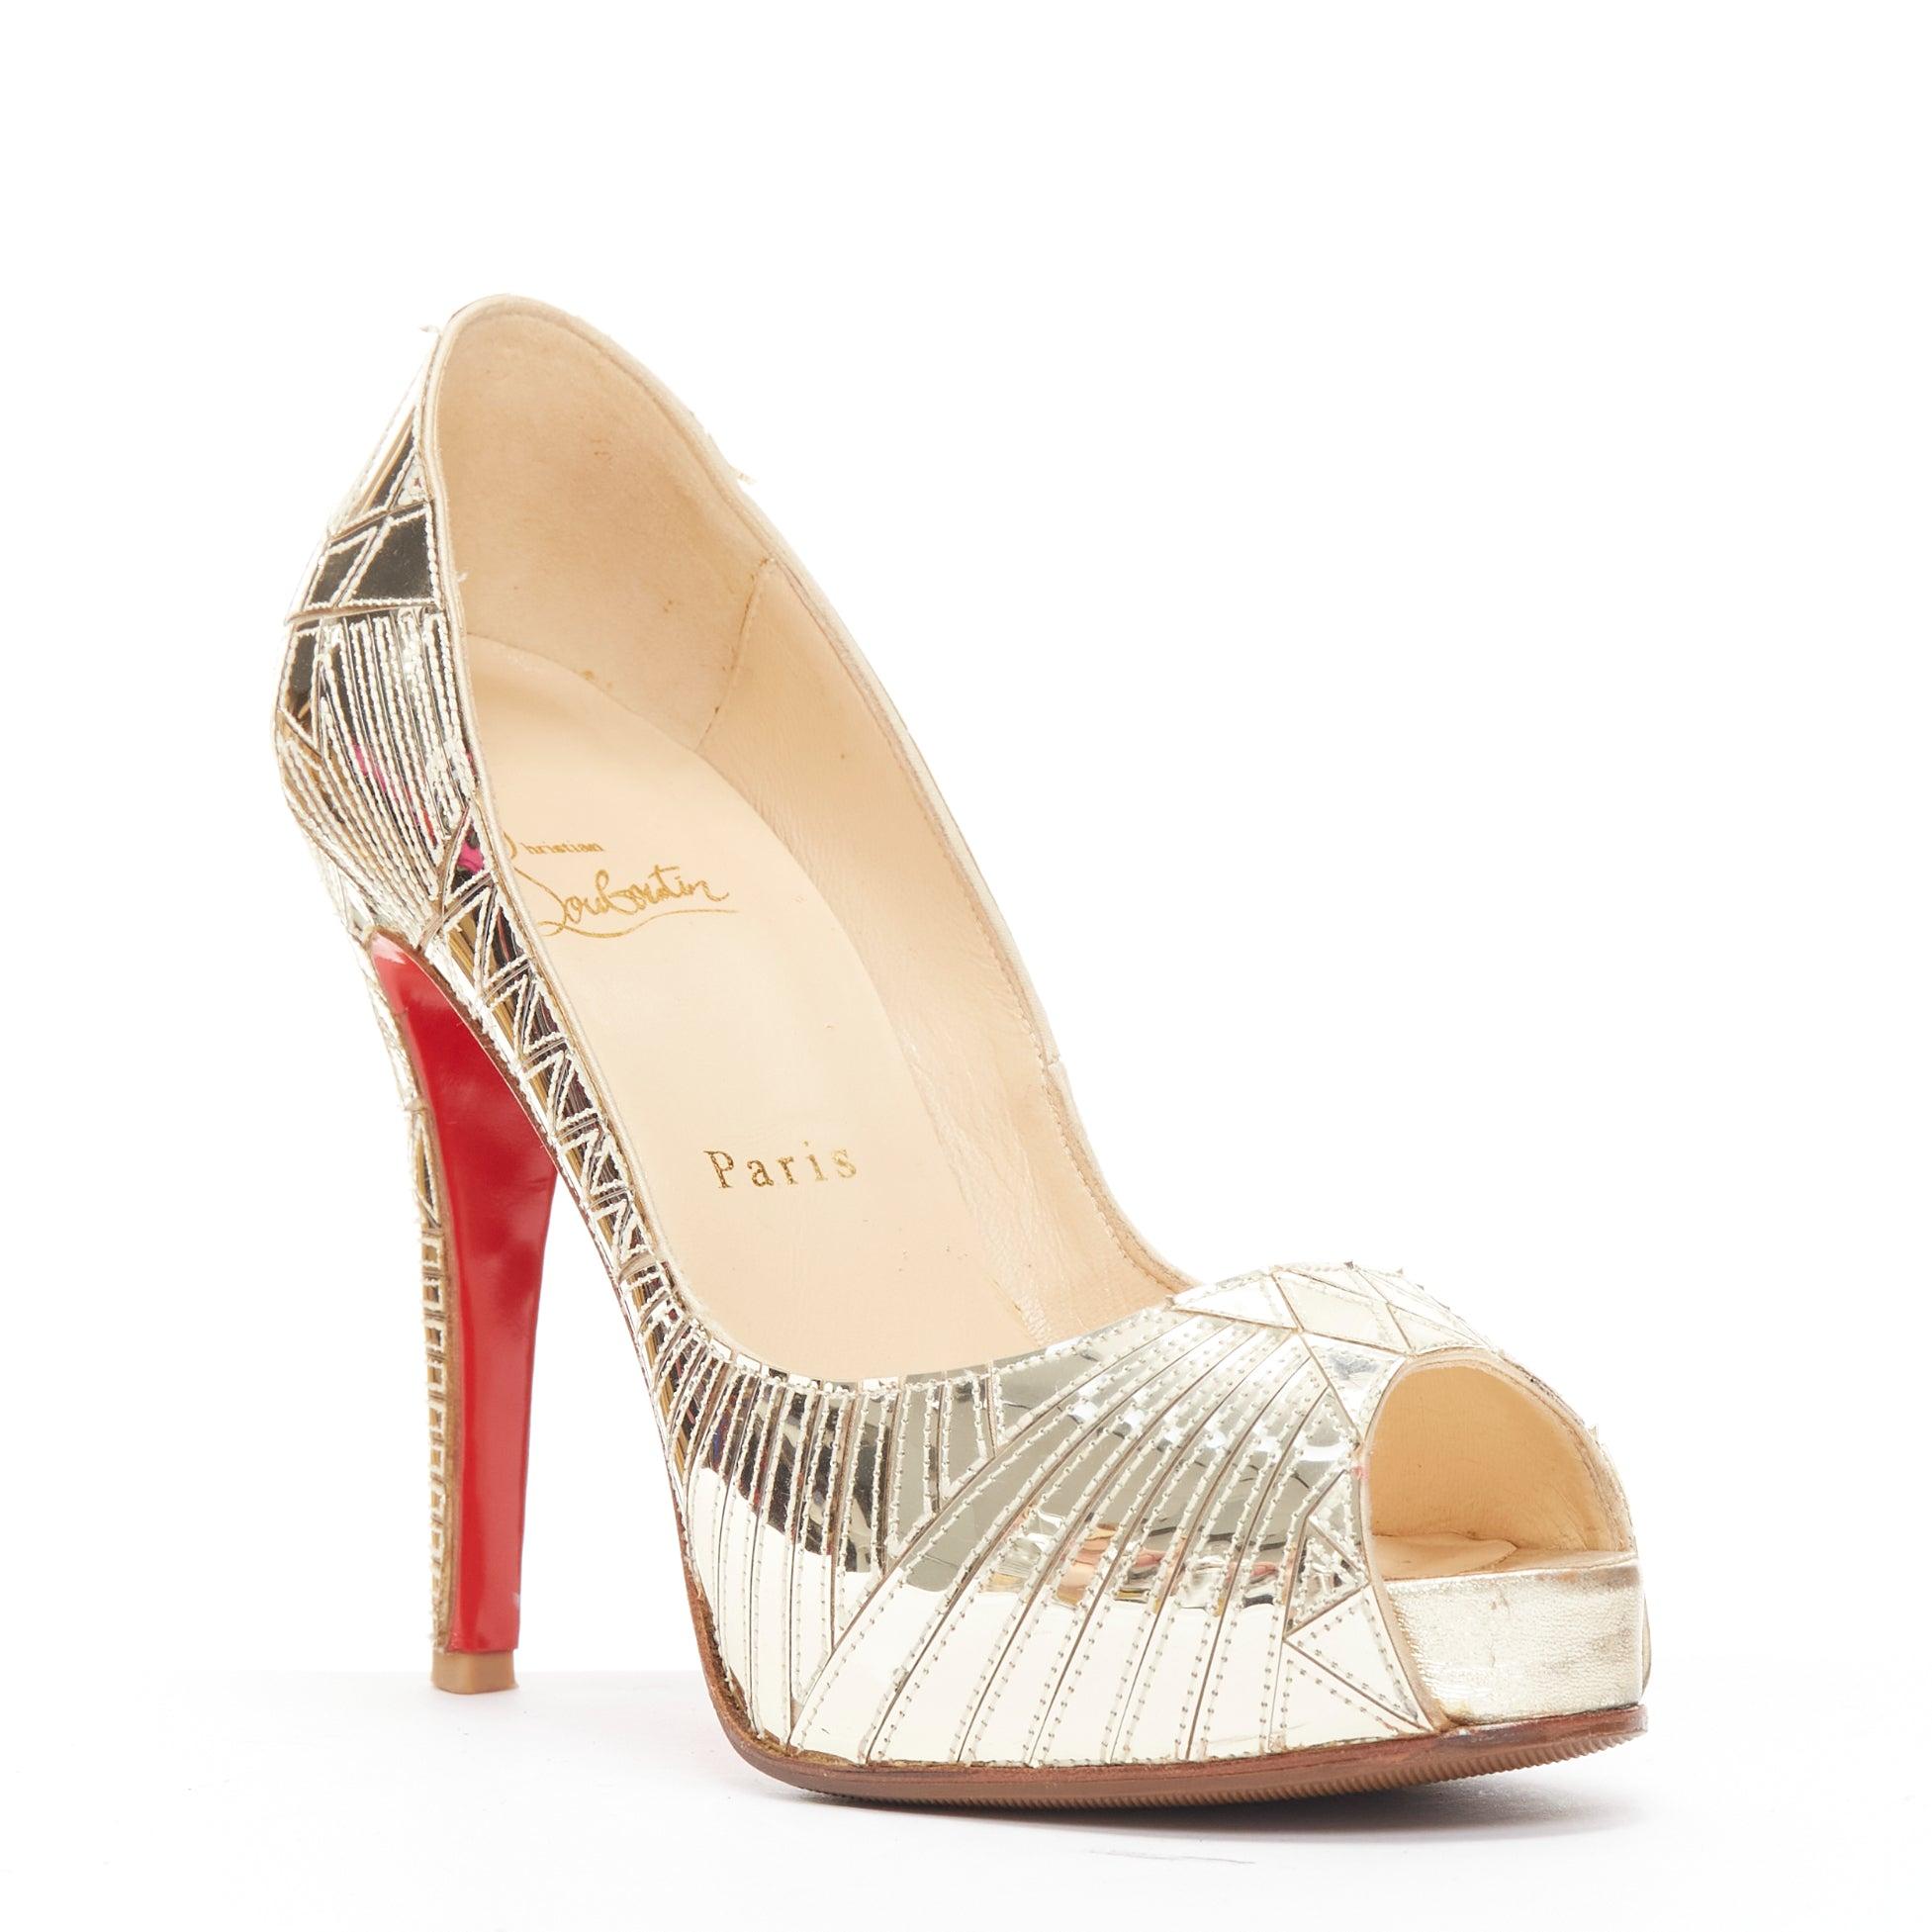 CHRISTIAN LOUBOUTIN Very Galazy mirrored gold patchwork peep toe platform EU37.5
Reference: NKLL/A00099
Brand: Christian Louboutin
Model: Very Galaxy
Material: Leather
Color: Gold
Pattern: Patchwork
Lining: Brown Leather
Extra Details: Pieced